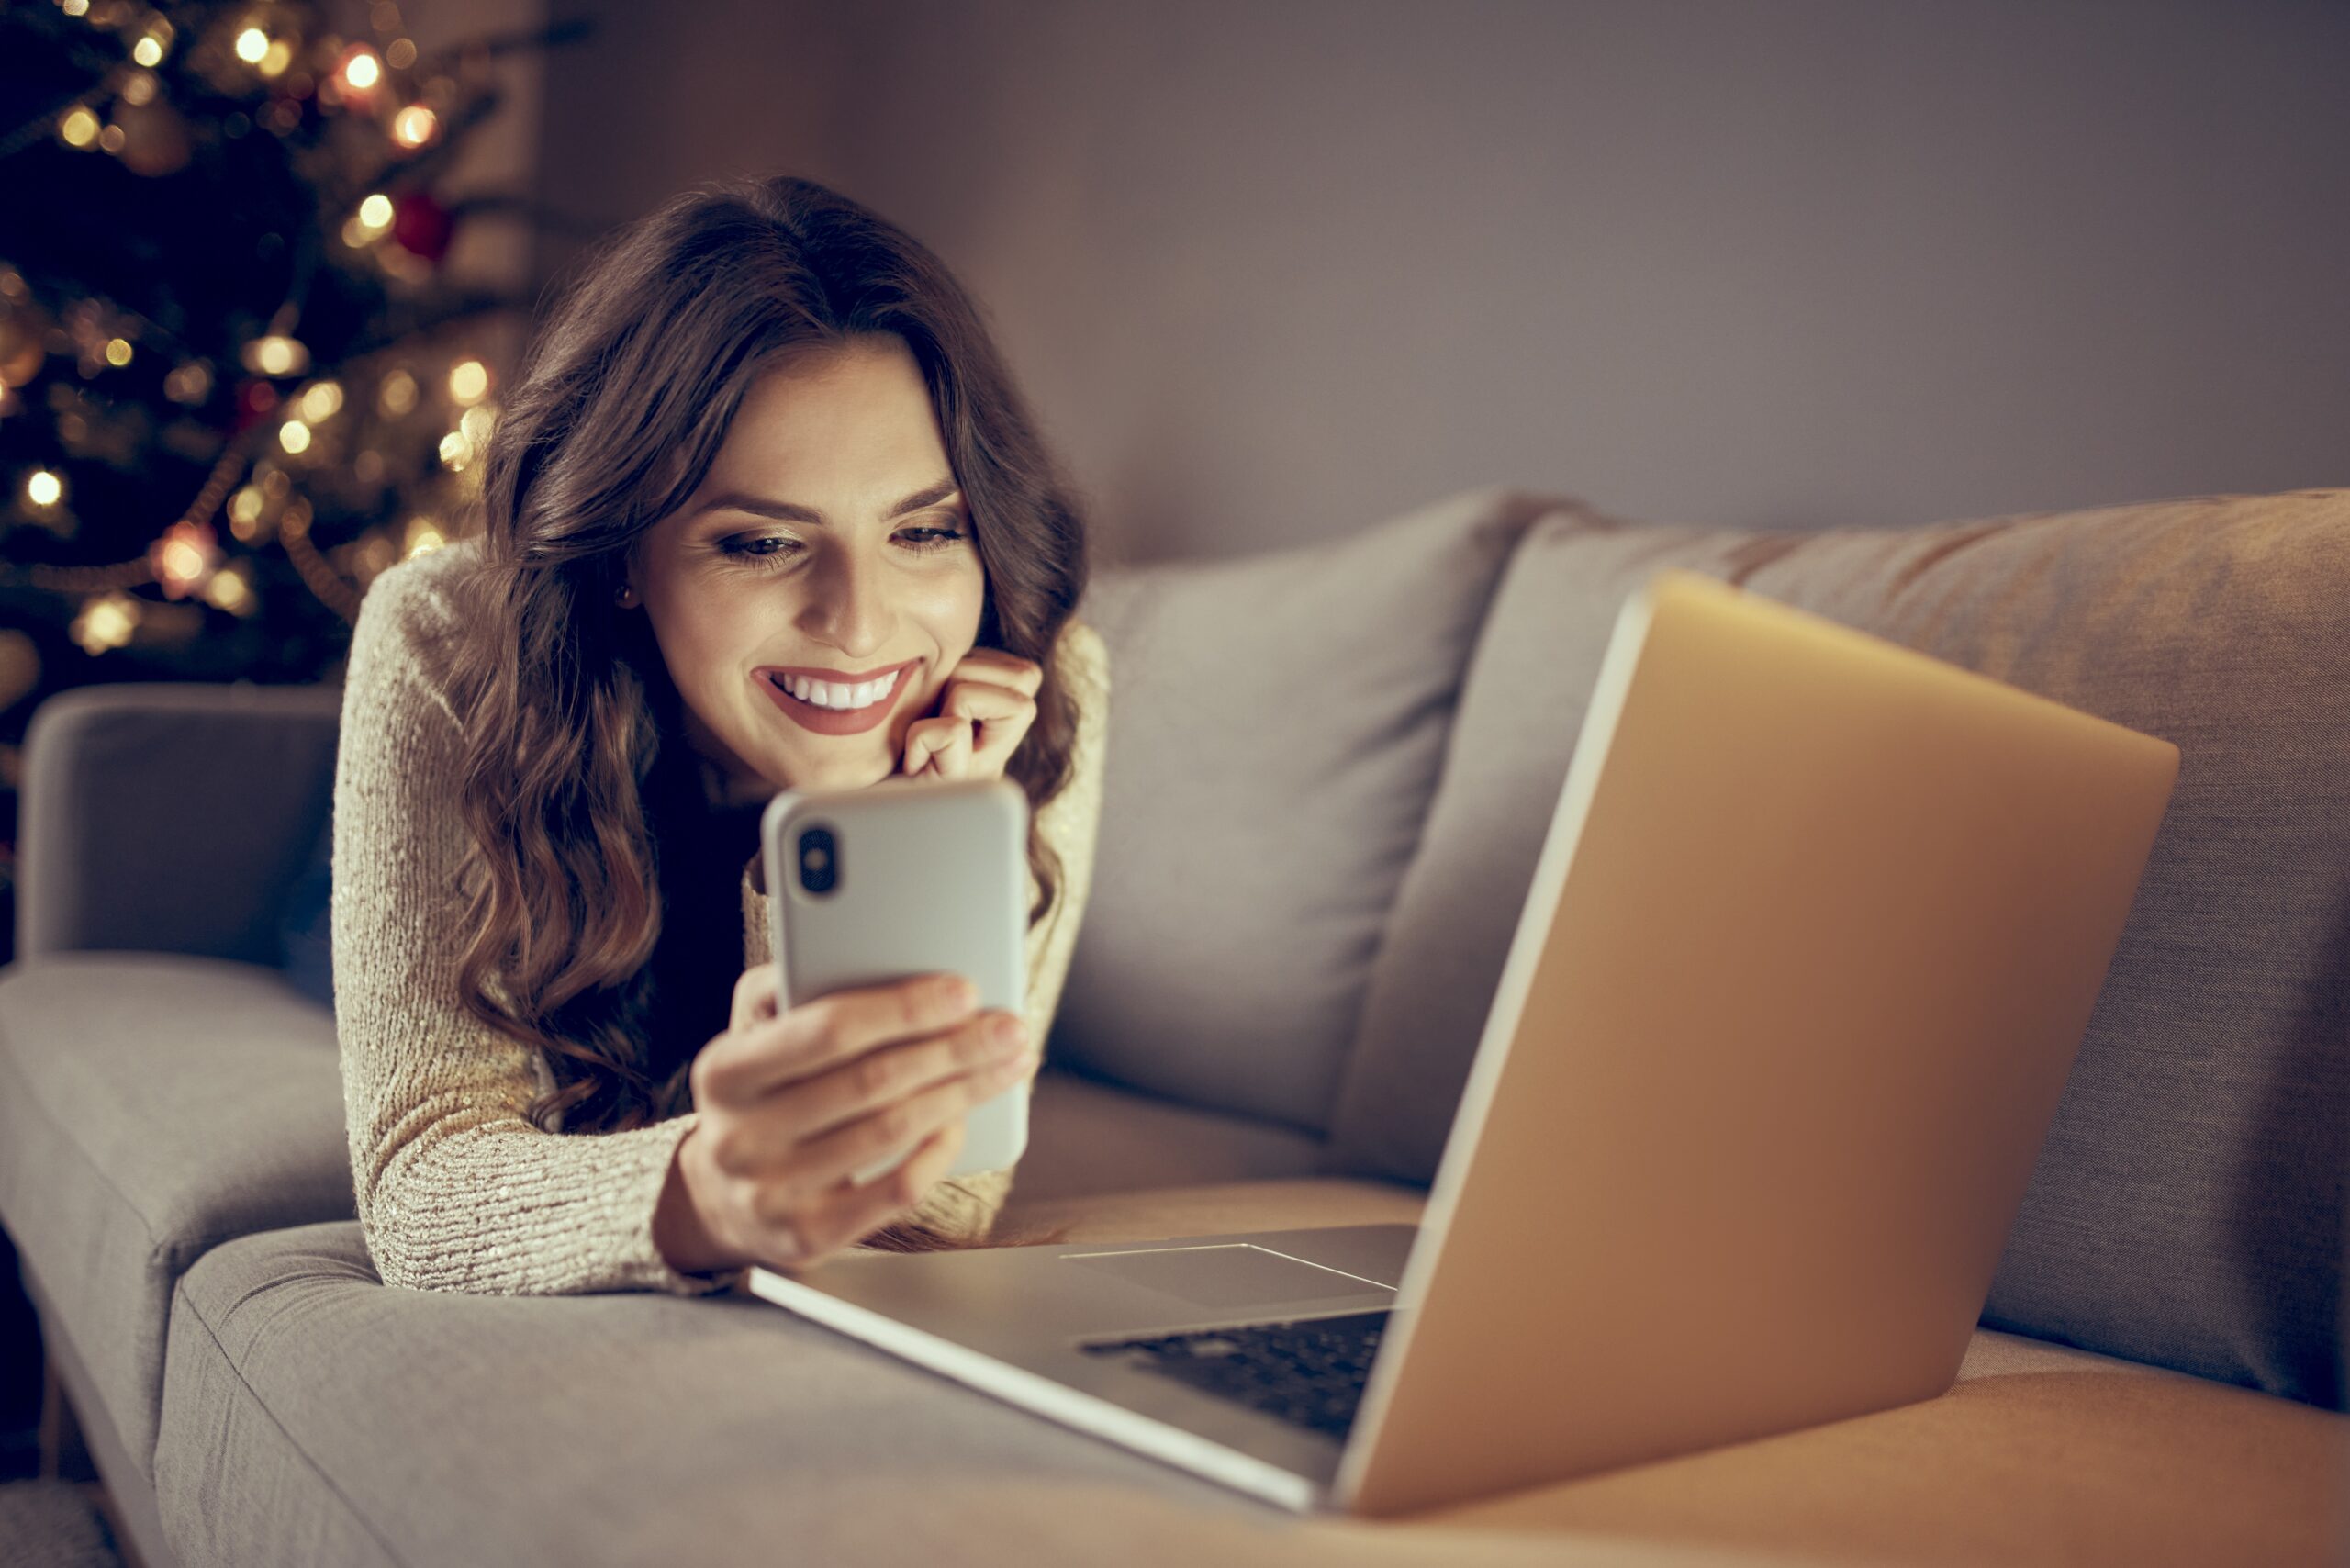 Beautiful young woman paying with mobile phone for online shopping ordering Christmas presents